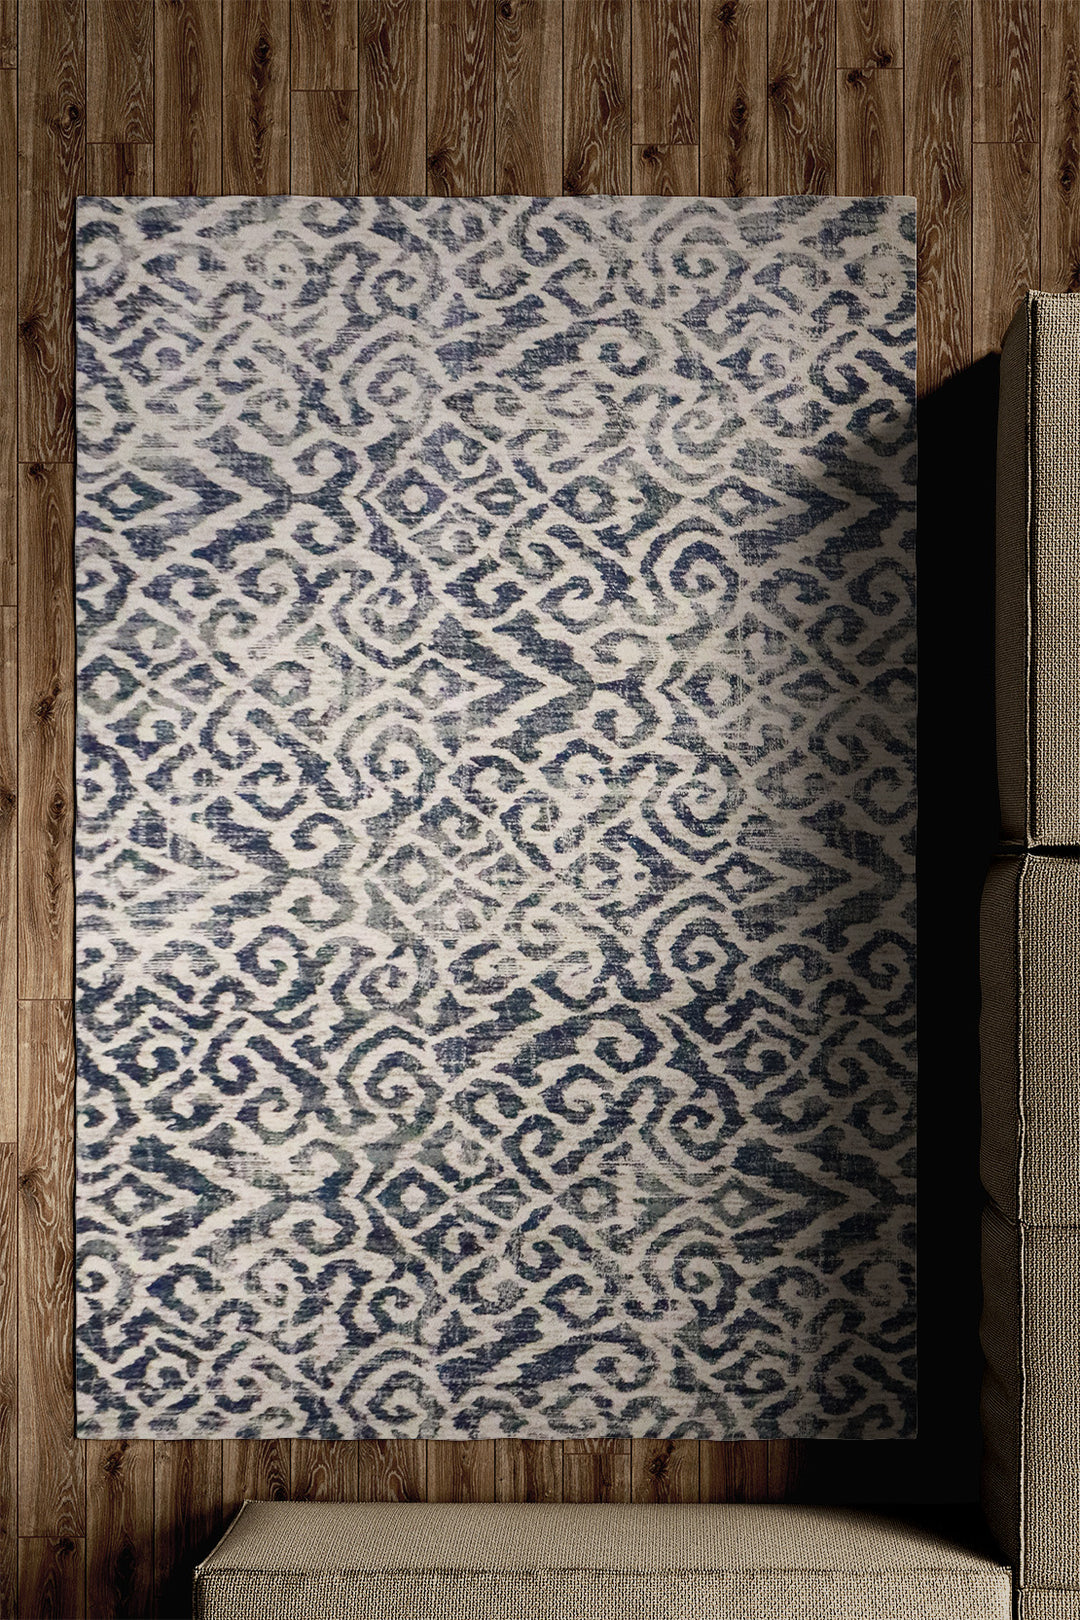 Turkish Modern Festival WD Rug - 7.8 x 9.8 FT - Blue and Gray - Sleek and Minimalist for Chic Interiors